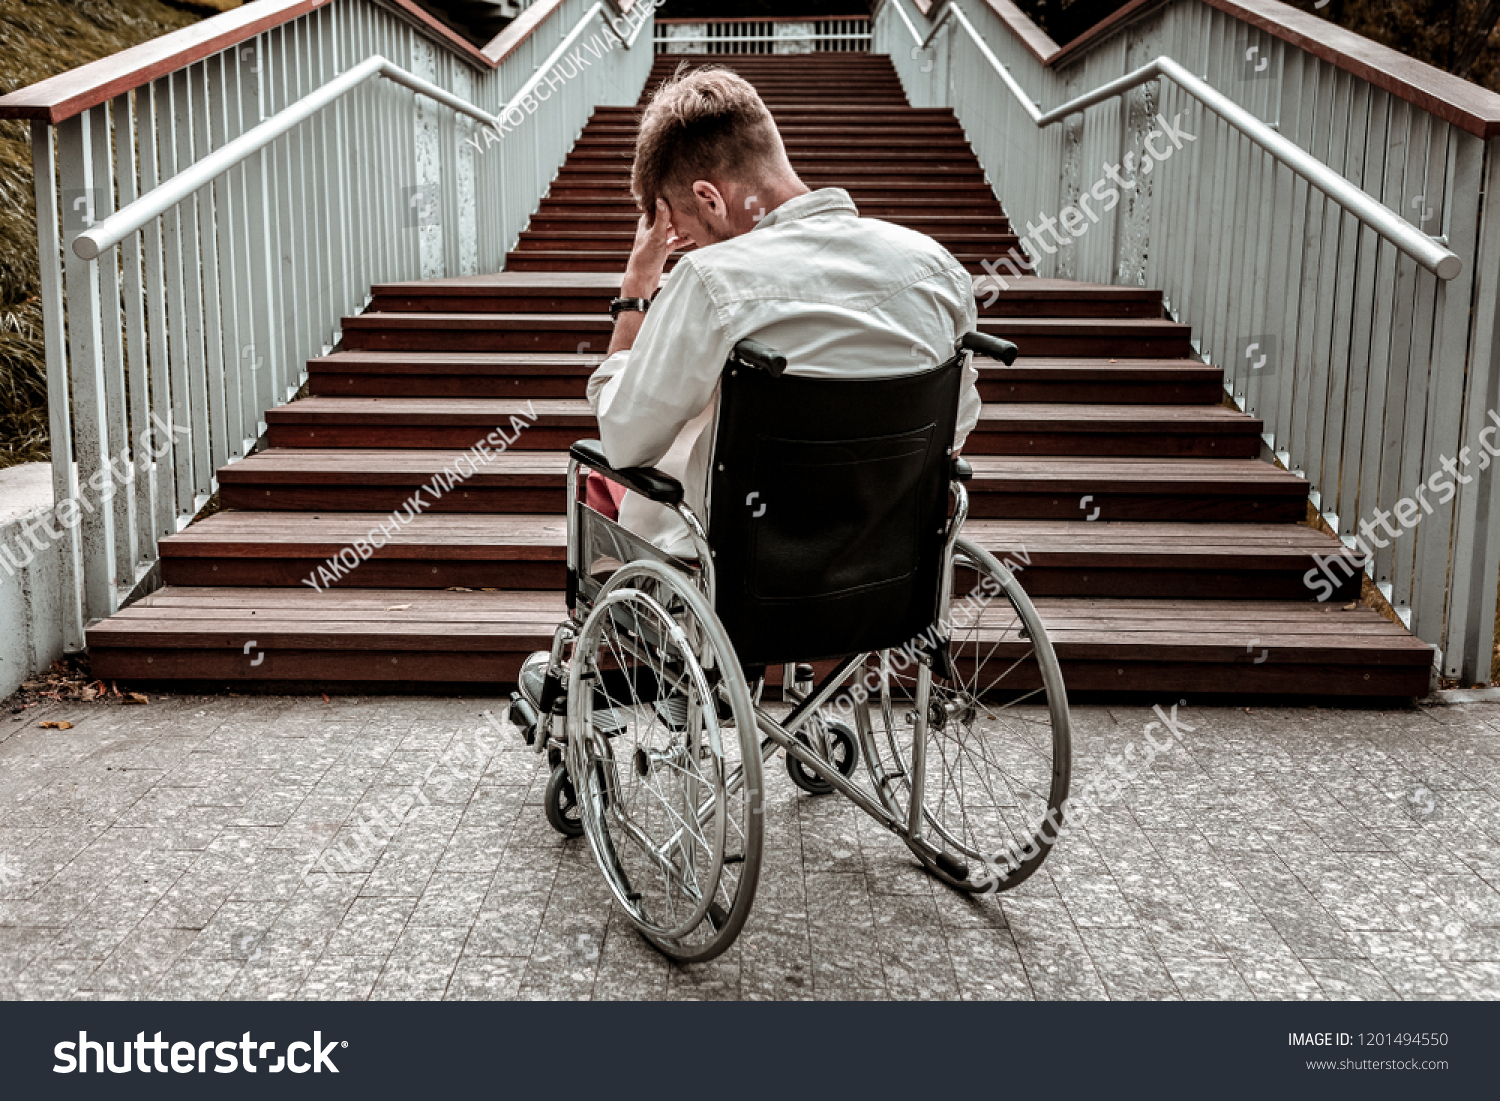 Many stairs. Horizontal image of depressed disabled man sitting in the wheelchair and facing the difficulties with climbing the stairs alone #1201494550